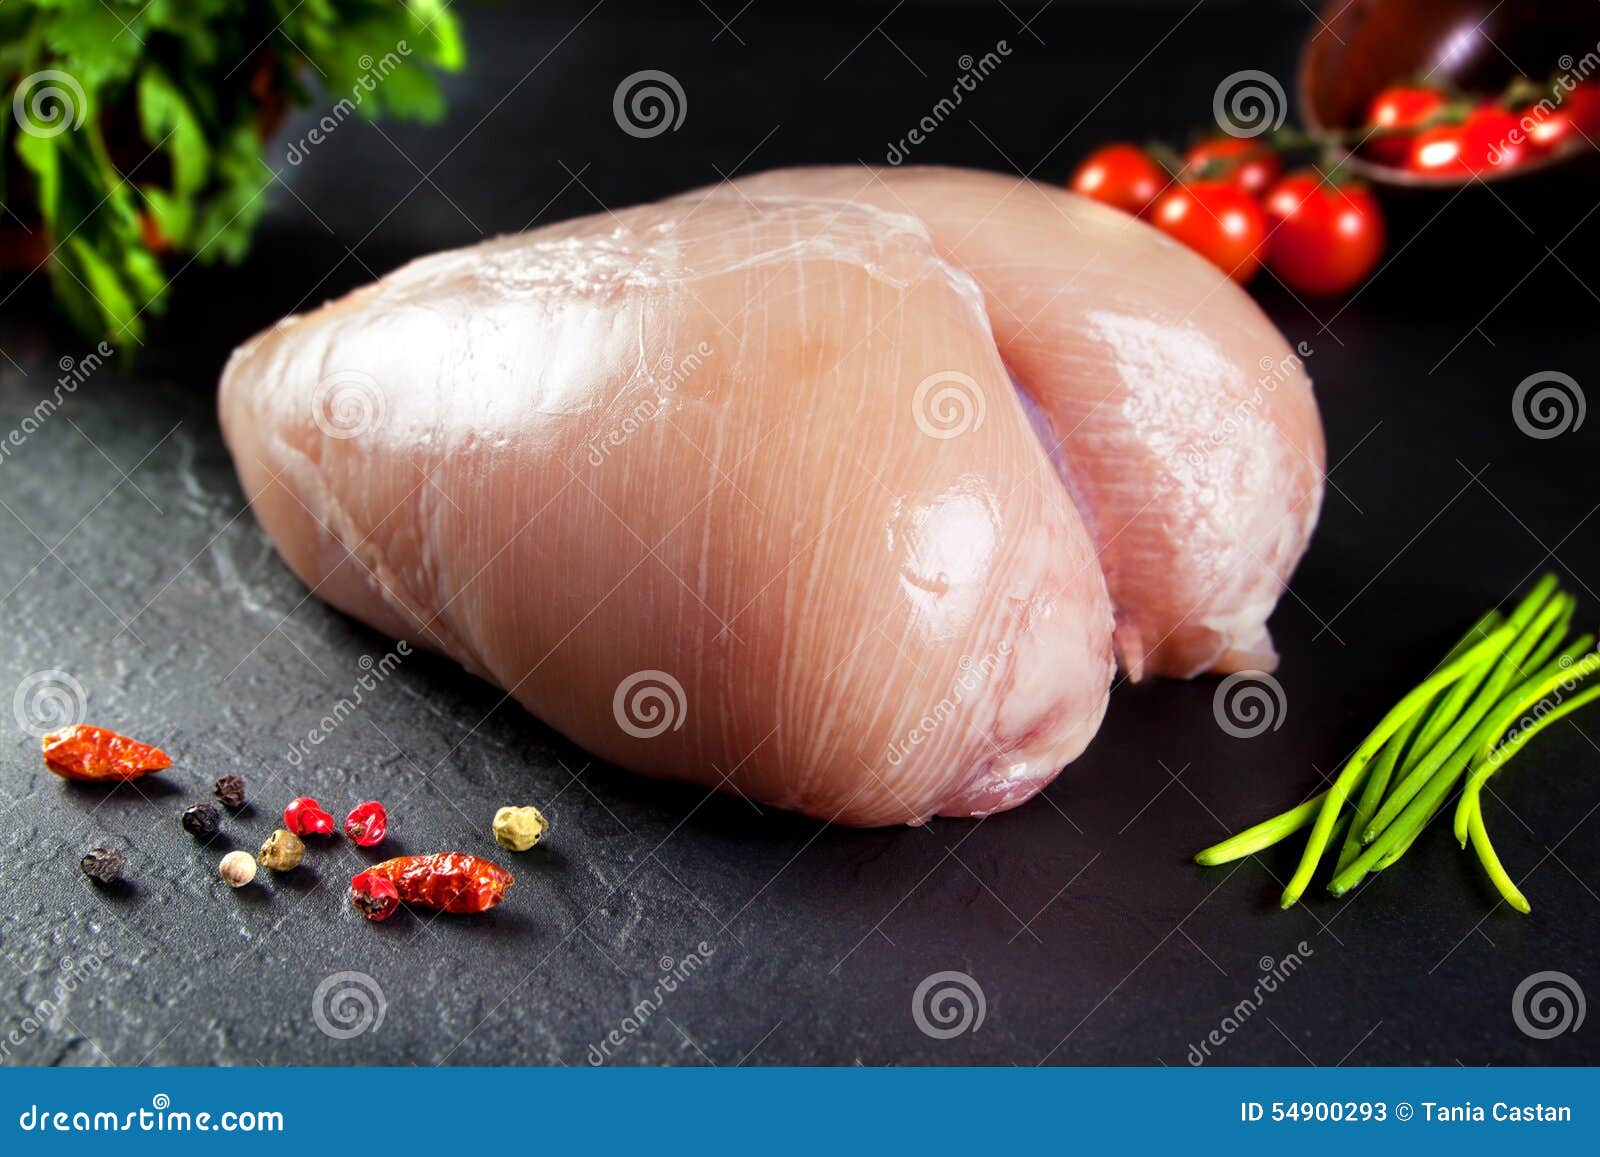 raw and fresh meat. whole chicken breast uncooked and uncut